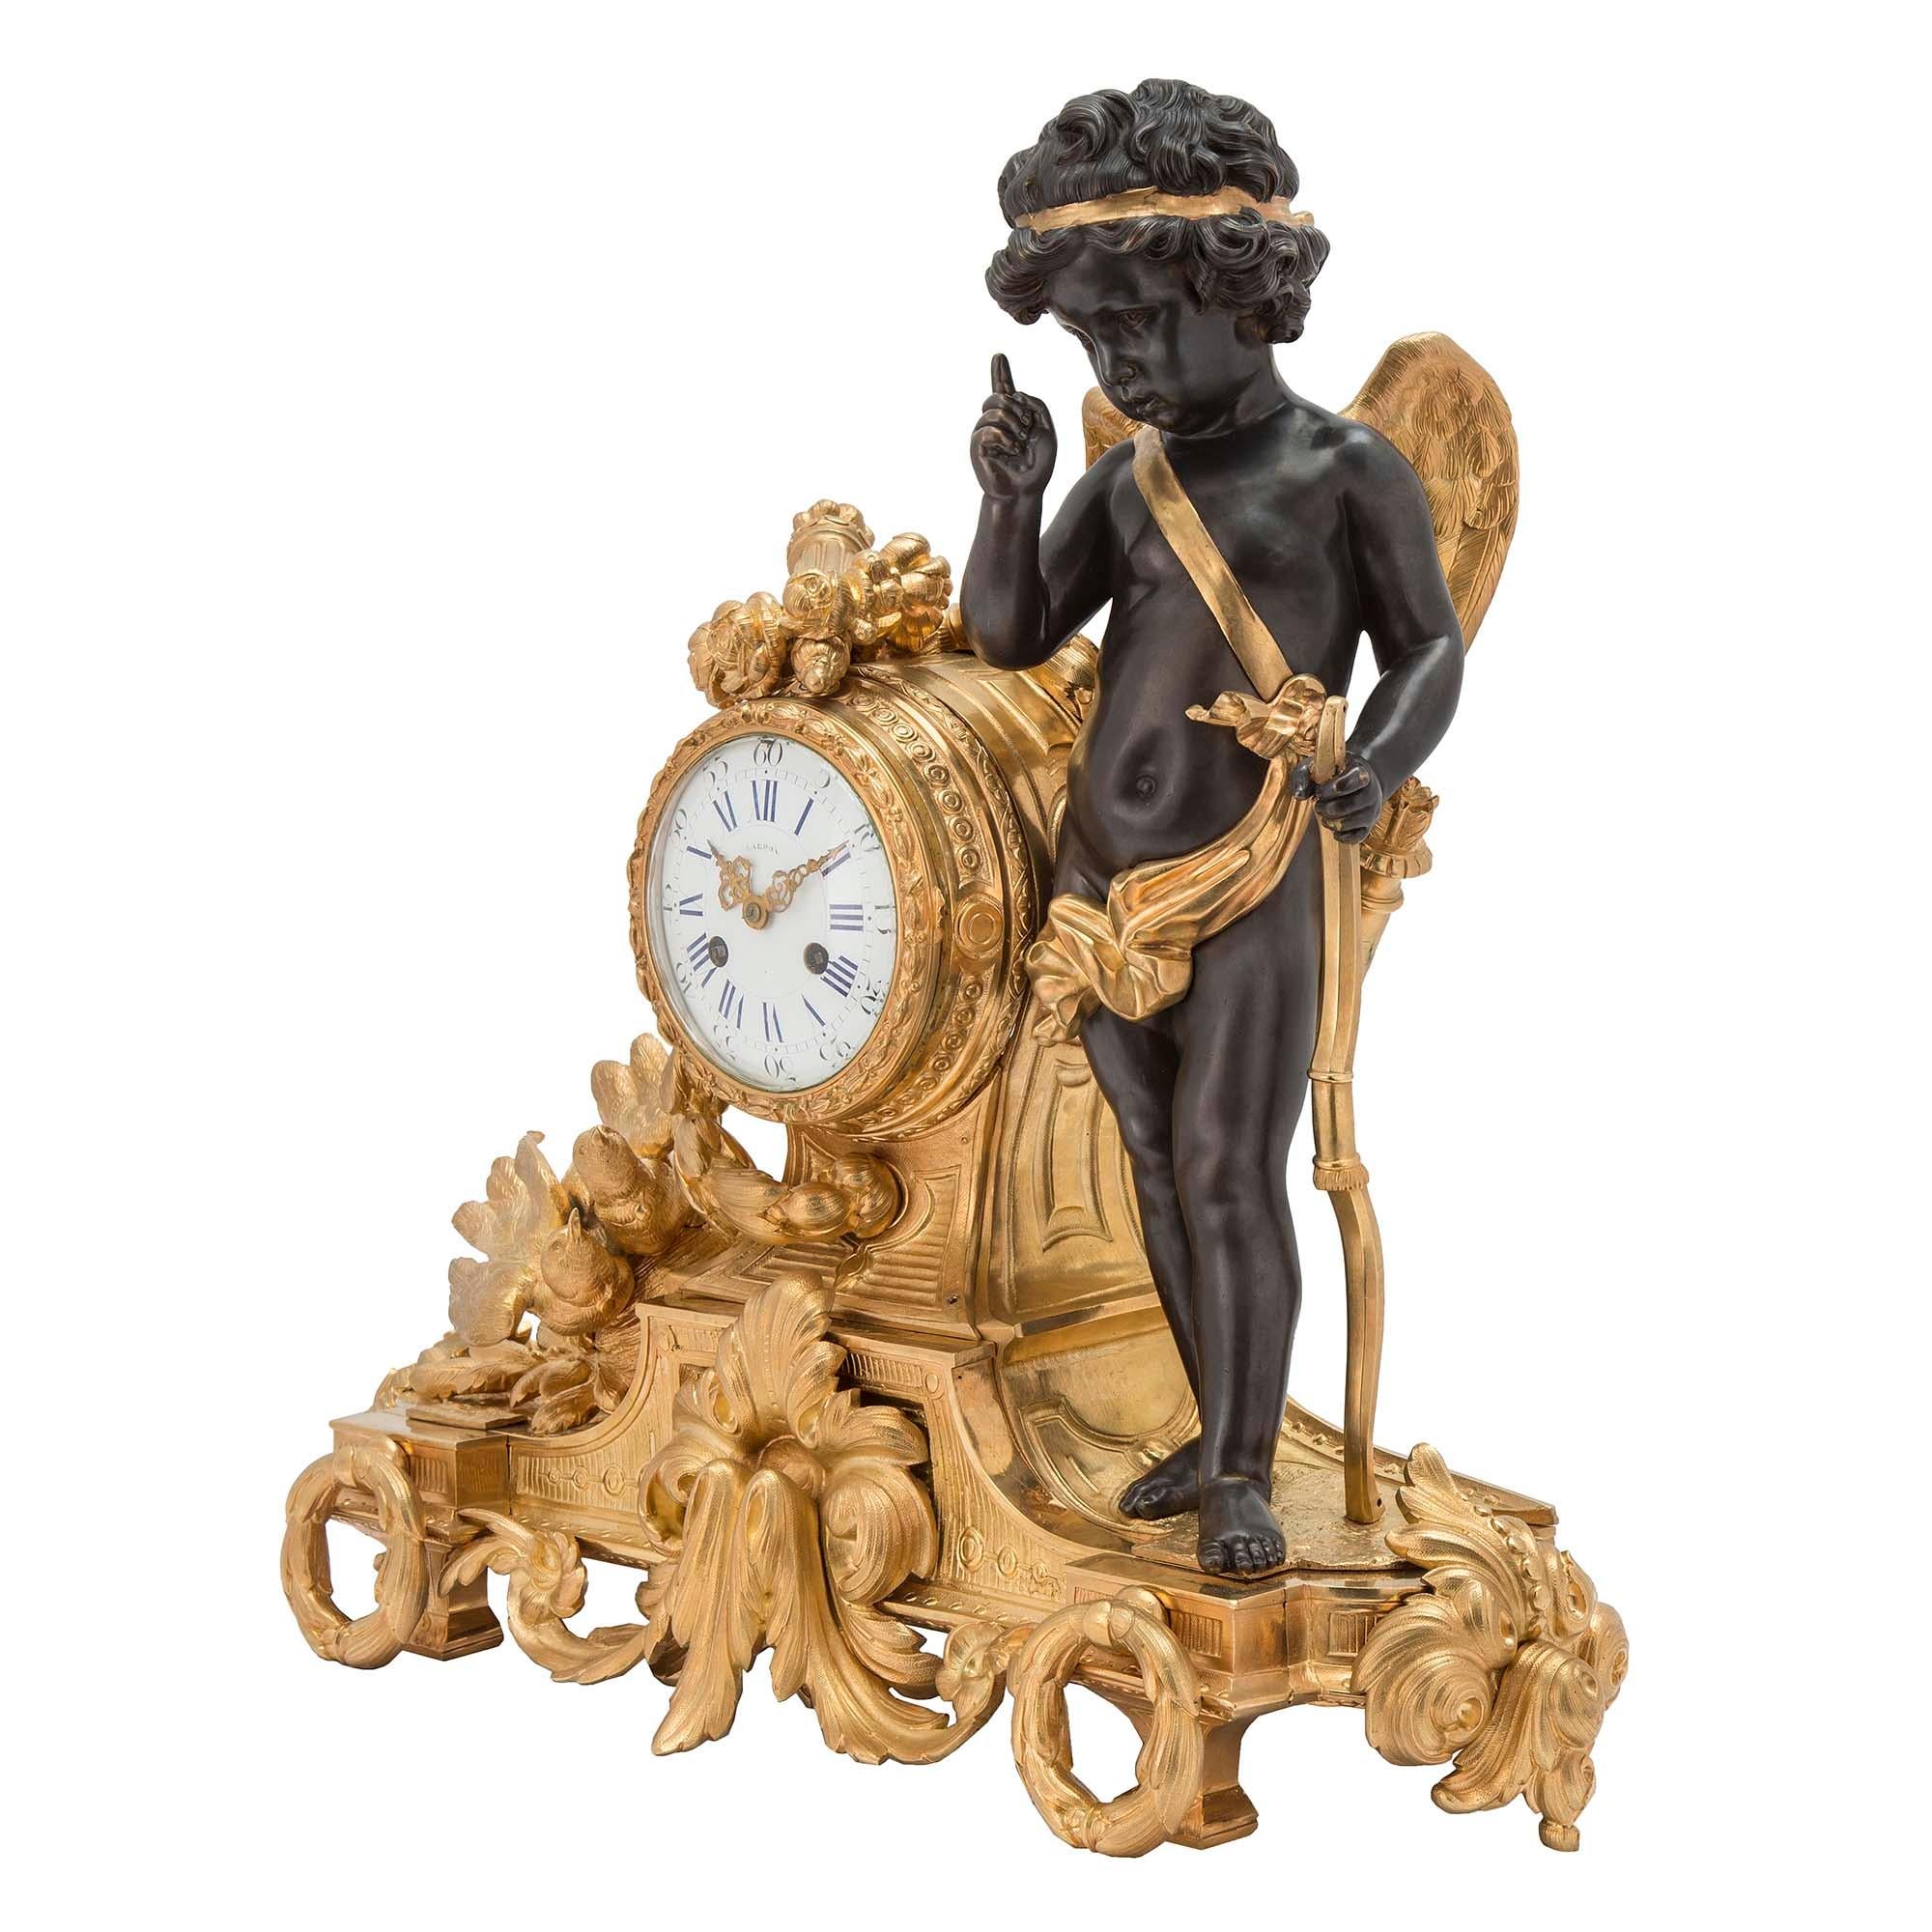 A stunning French mid 19th century Louis XVI st. ormolu clock, by Bardon, Montpellier. The clock has two love birds on the left looking over to a patinated bronze cupid, standing proudly with his bow. The enameled dial is raised on a heavily chased